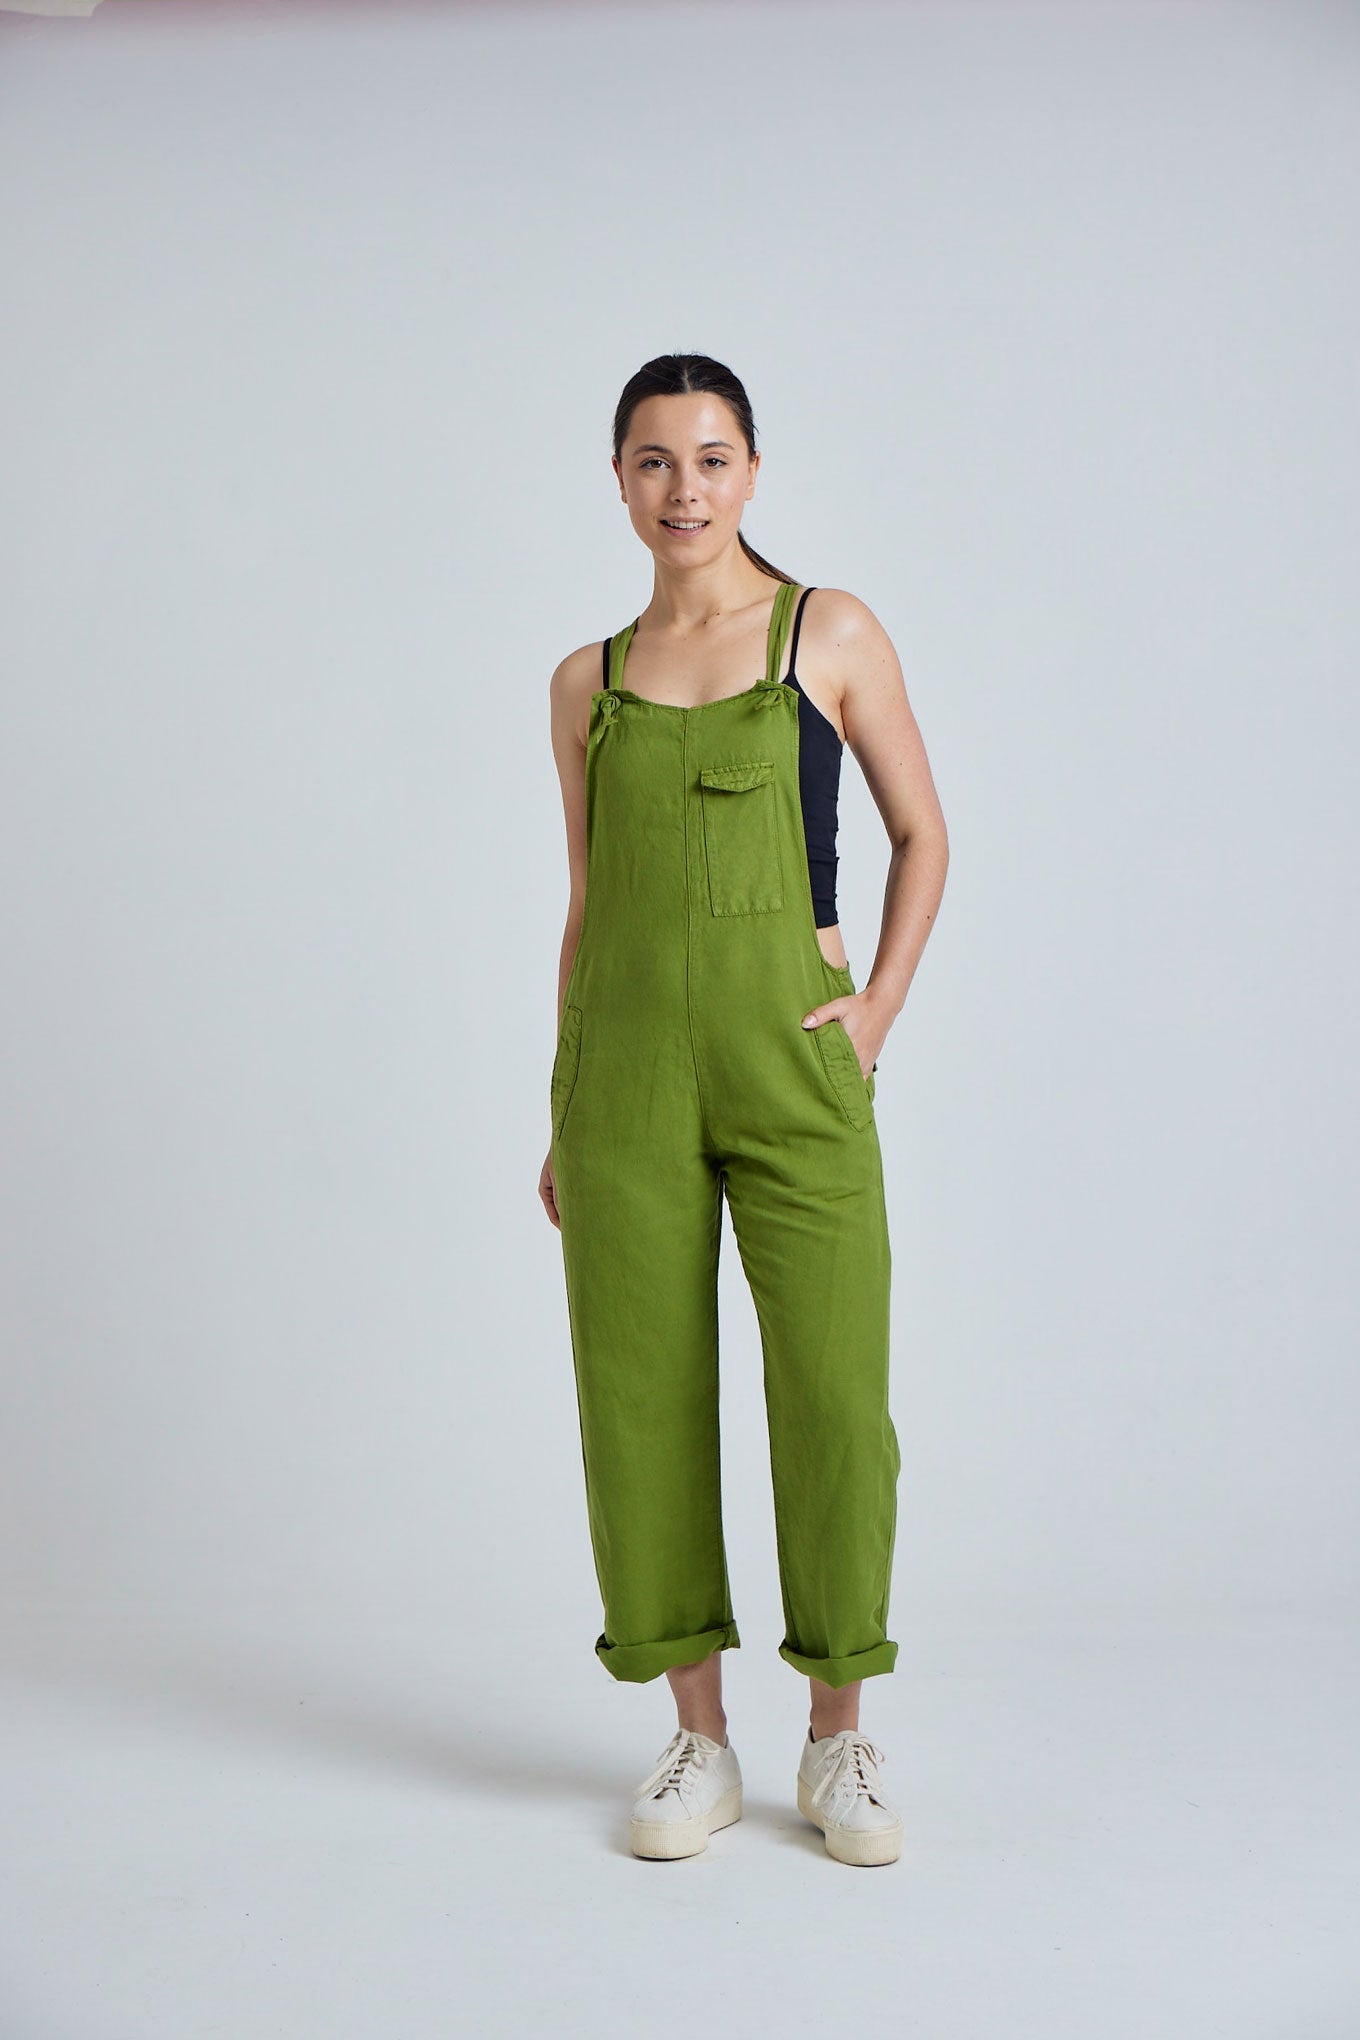 MARY-LOU Green - GOTS Organic Cotton Dungaress by Flax & Loom, SIZE 4 / UK 14 / EUR 42